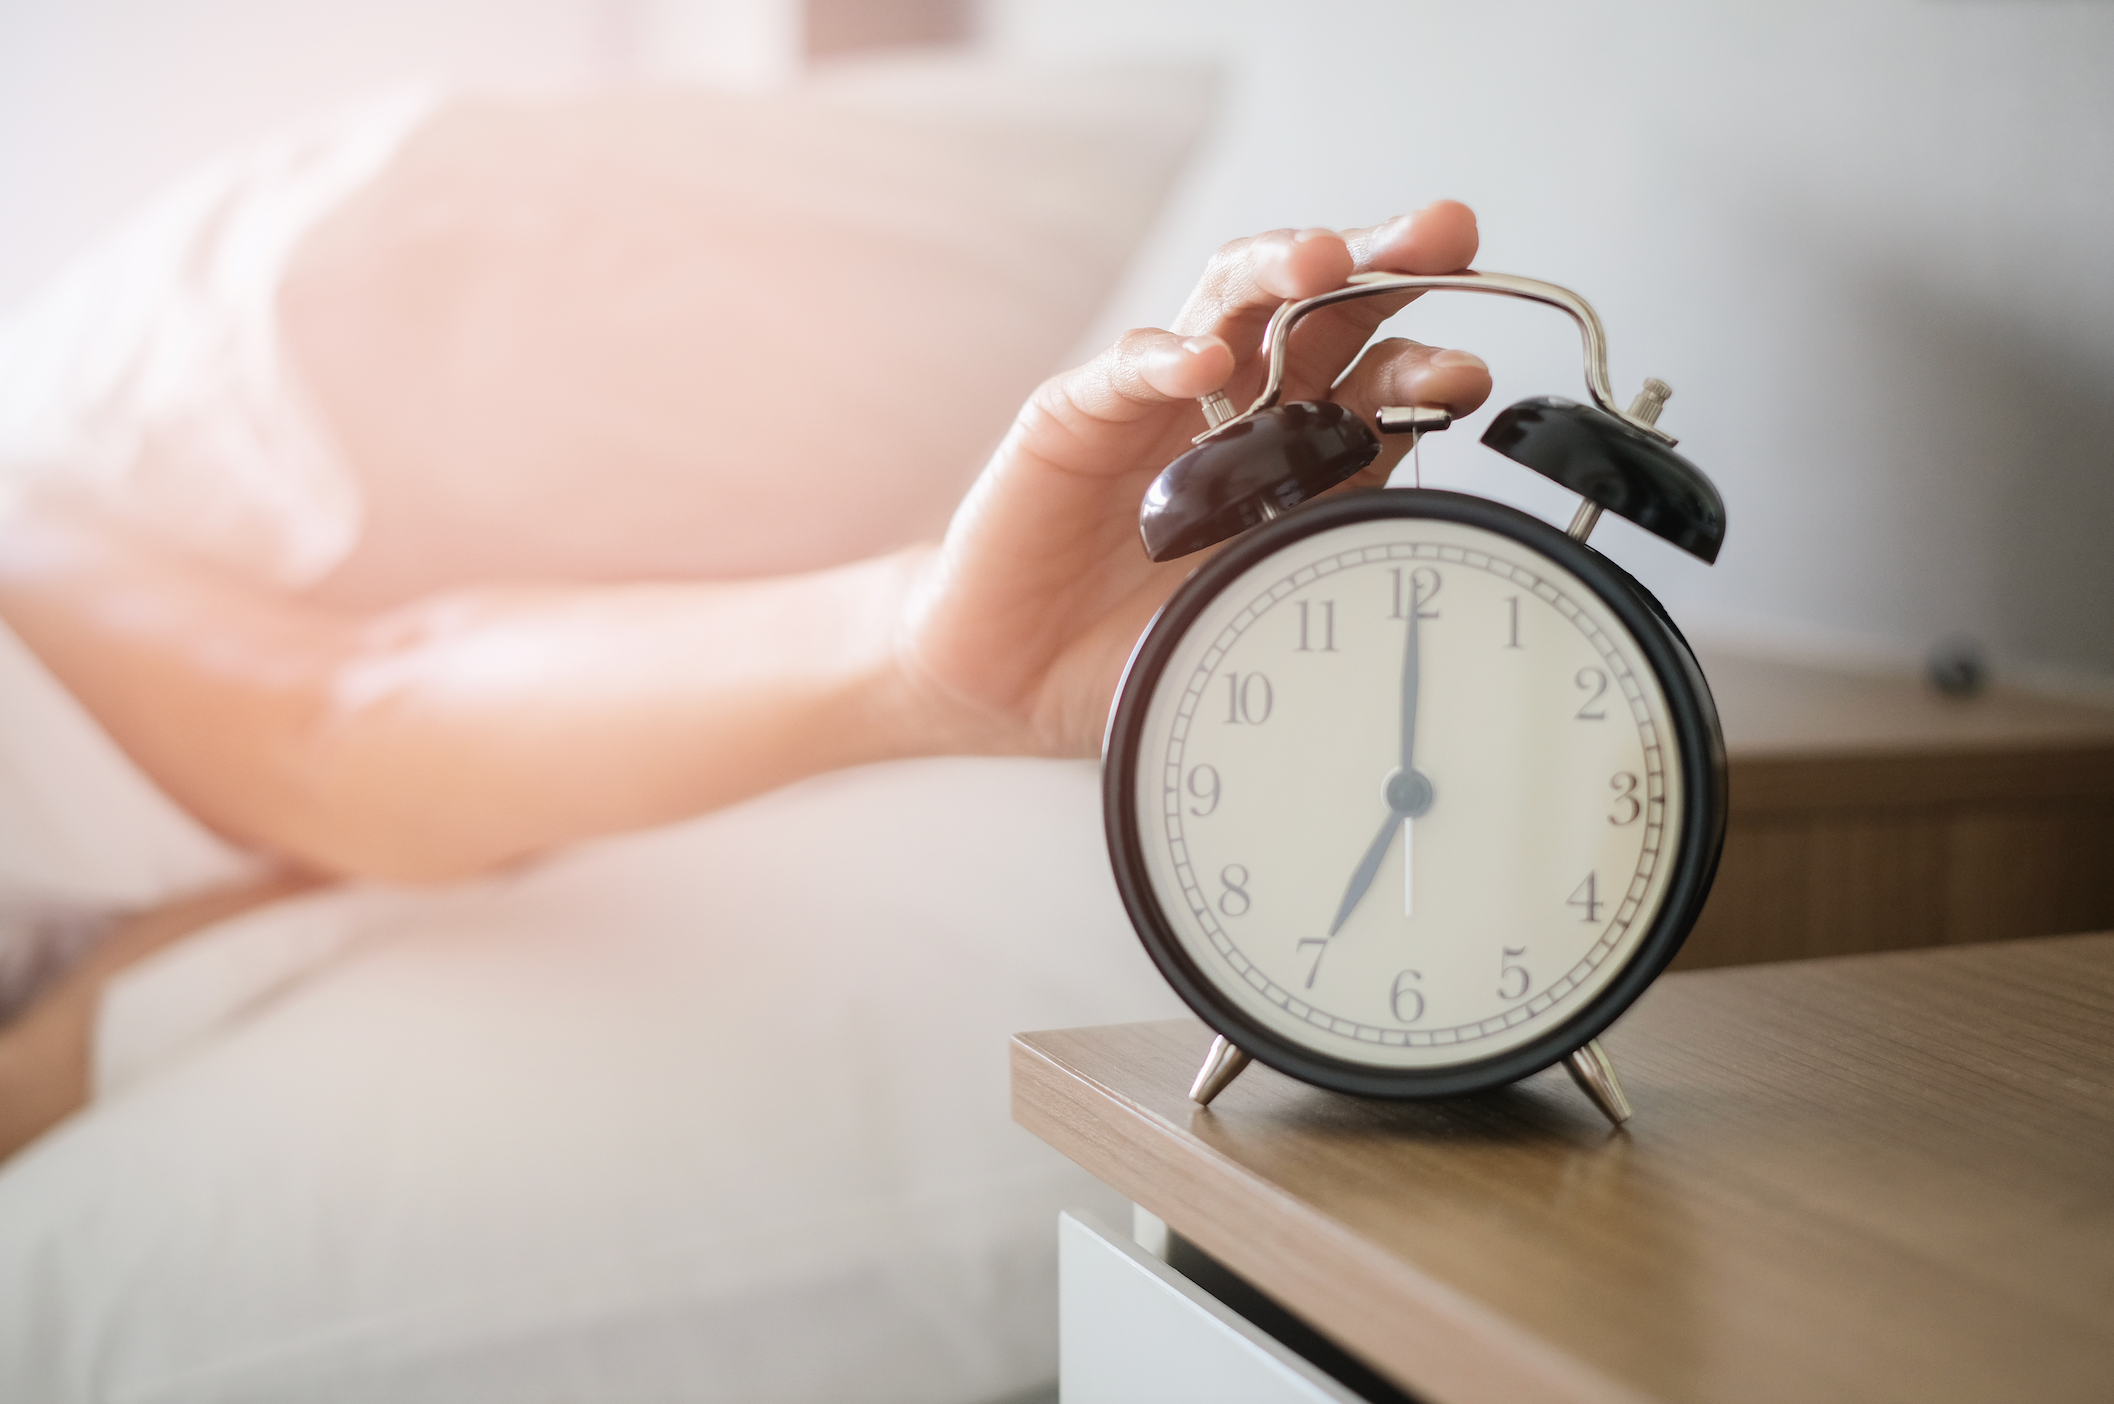 Poor Sleep Duration in Type 2 Diabetes Tied to Greater Microvascular Disease Risk